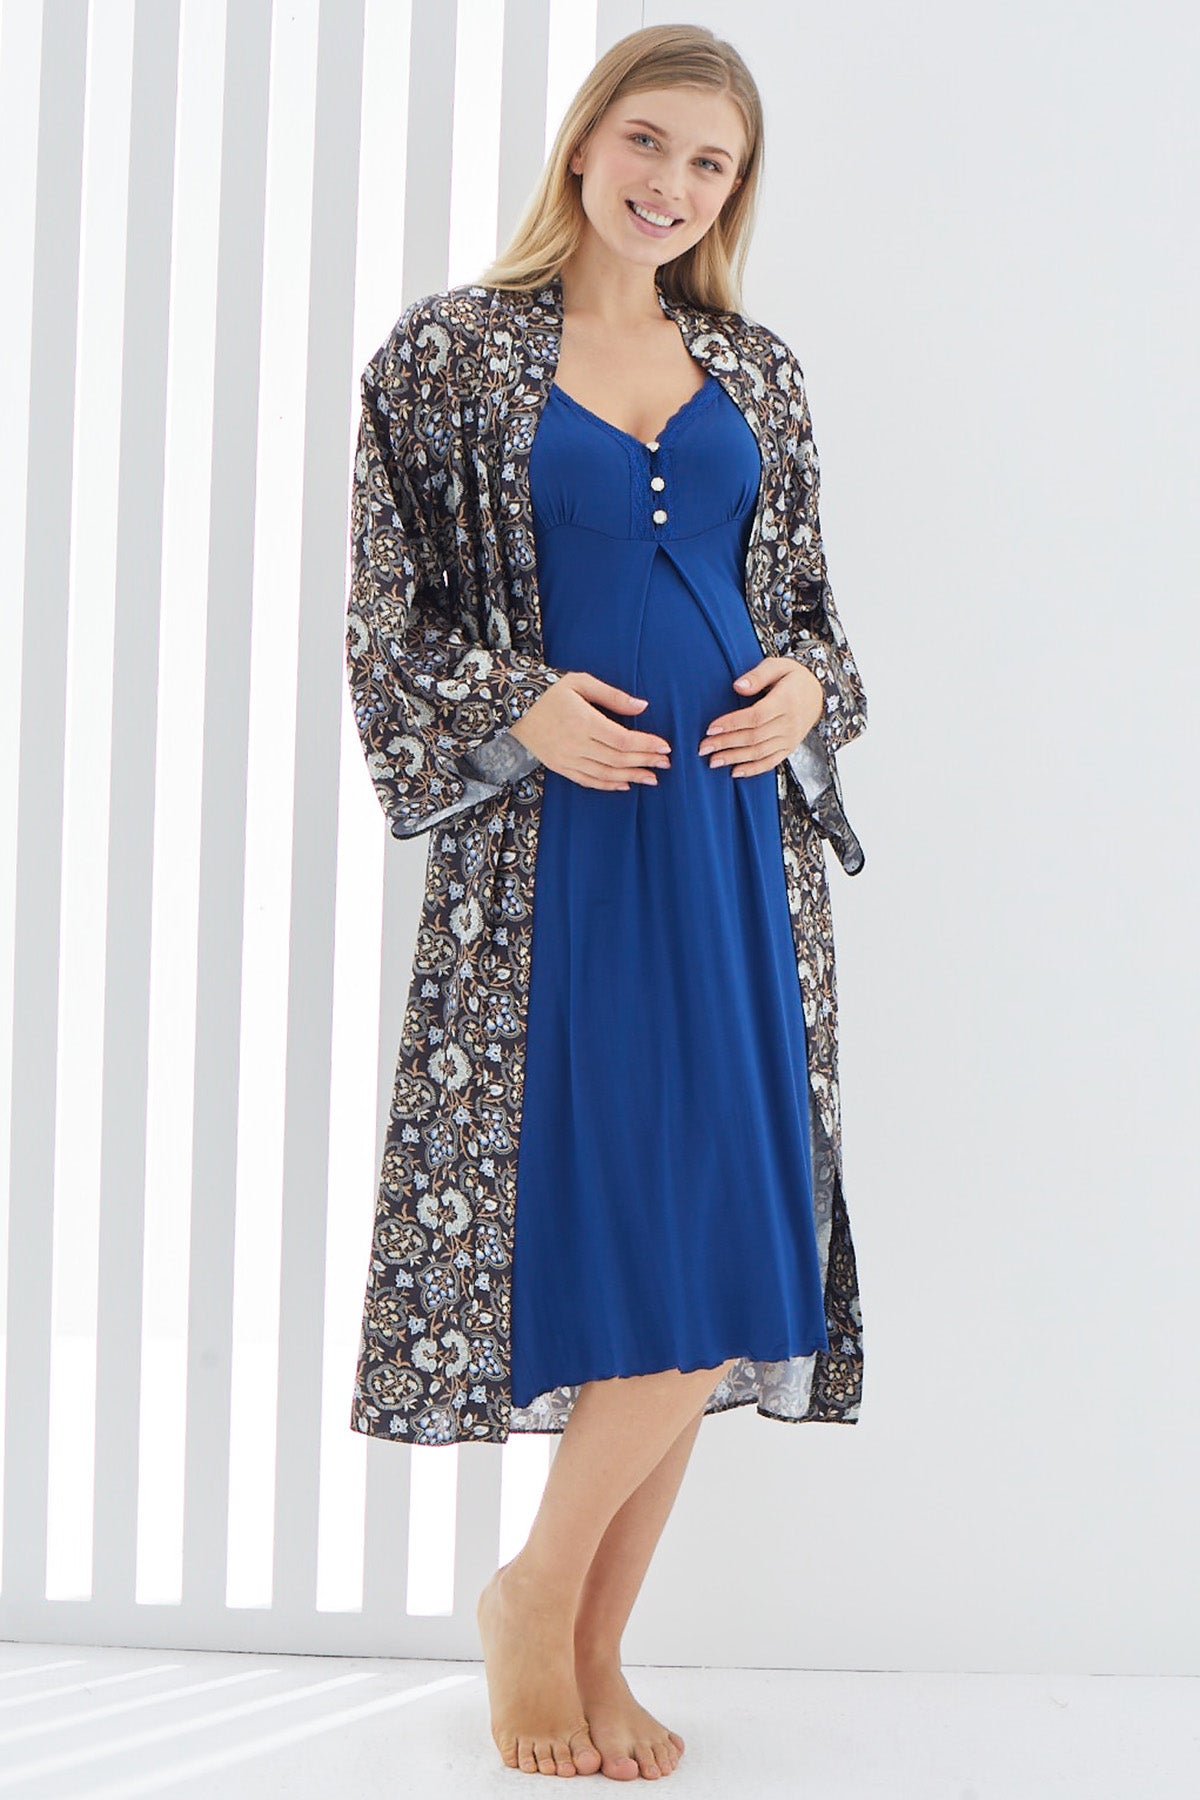 Shopymommy 2271 Lace Maternity & Nursing Nightgown With Patterned Robe Navy Blue